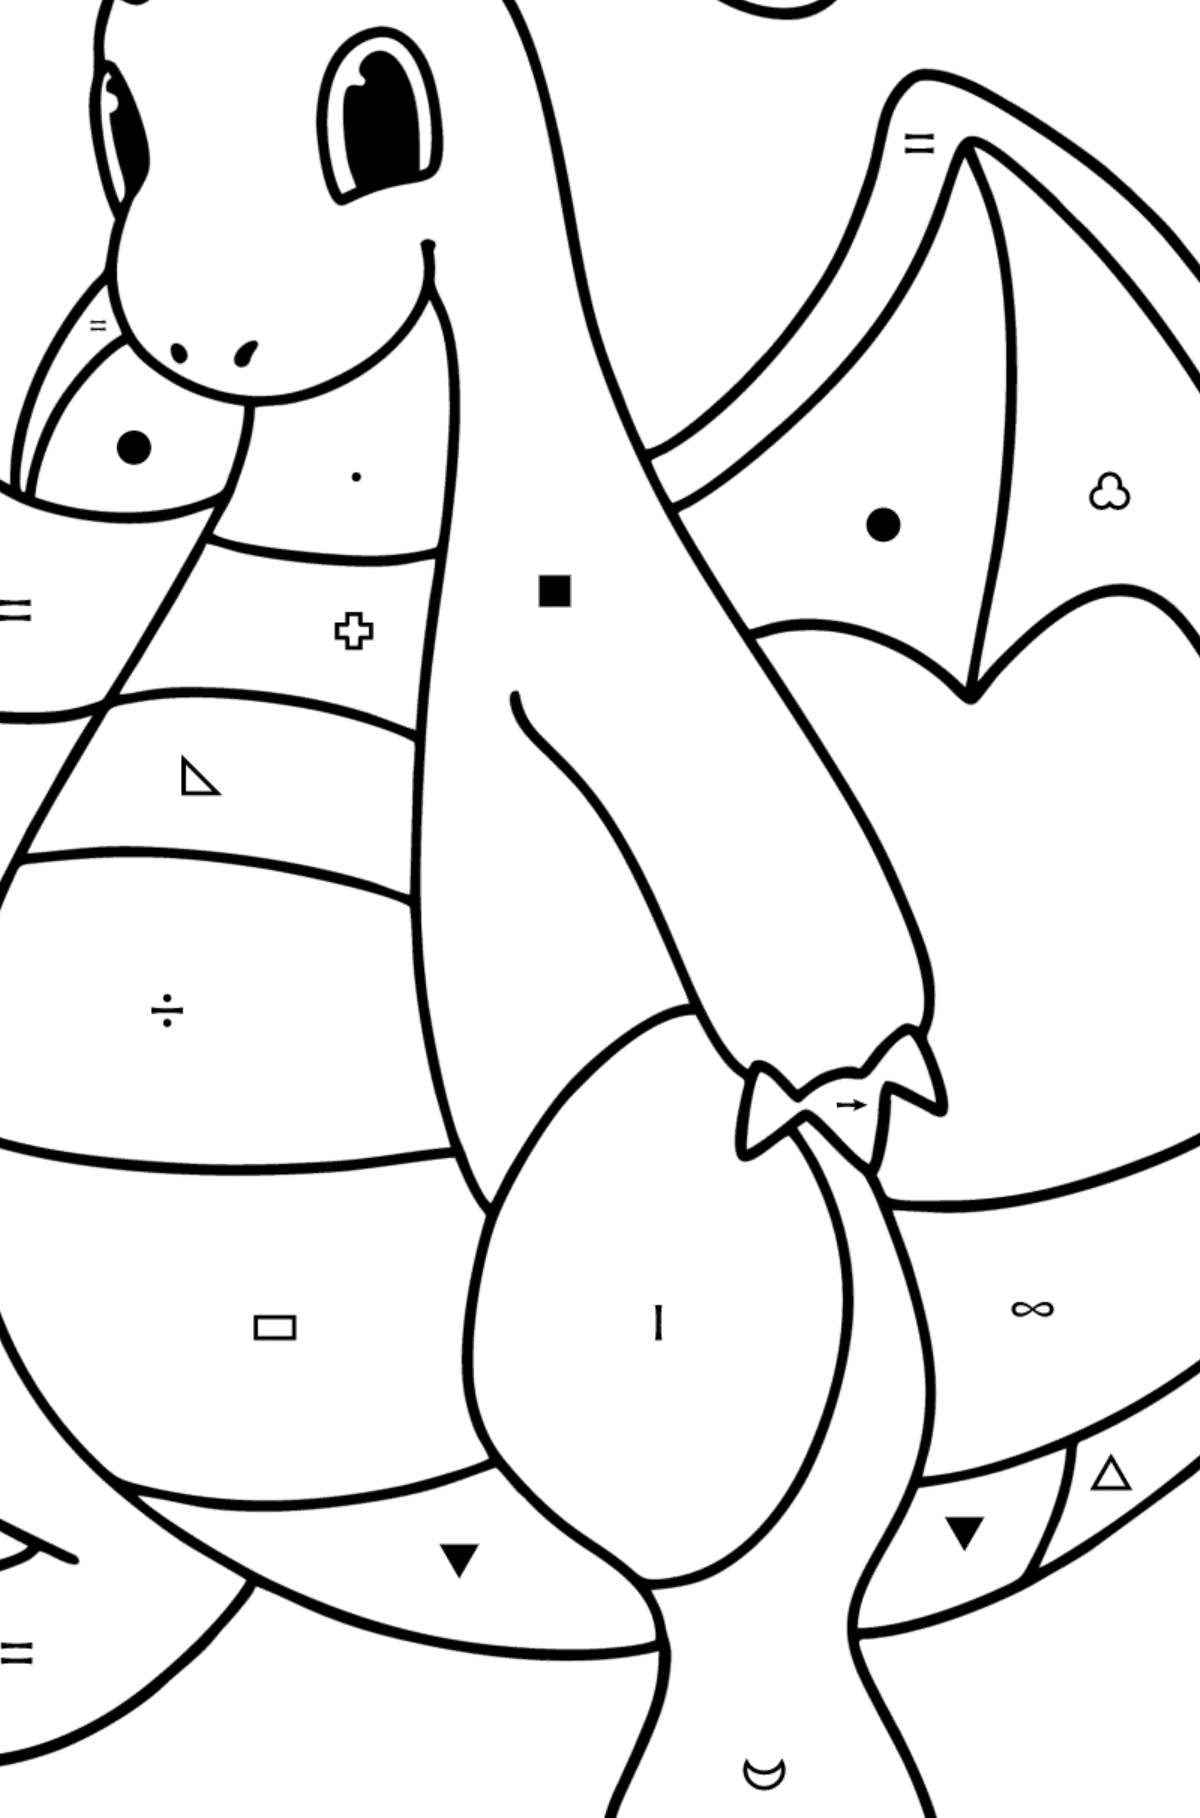 Pokemon Go Dragonite coloring page - Coloring by Symbols and Geometric Shapes for Kids